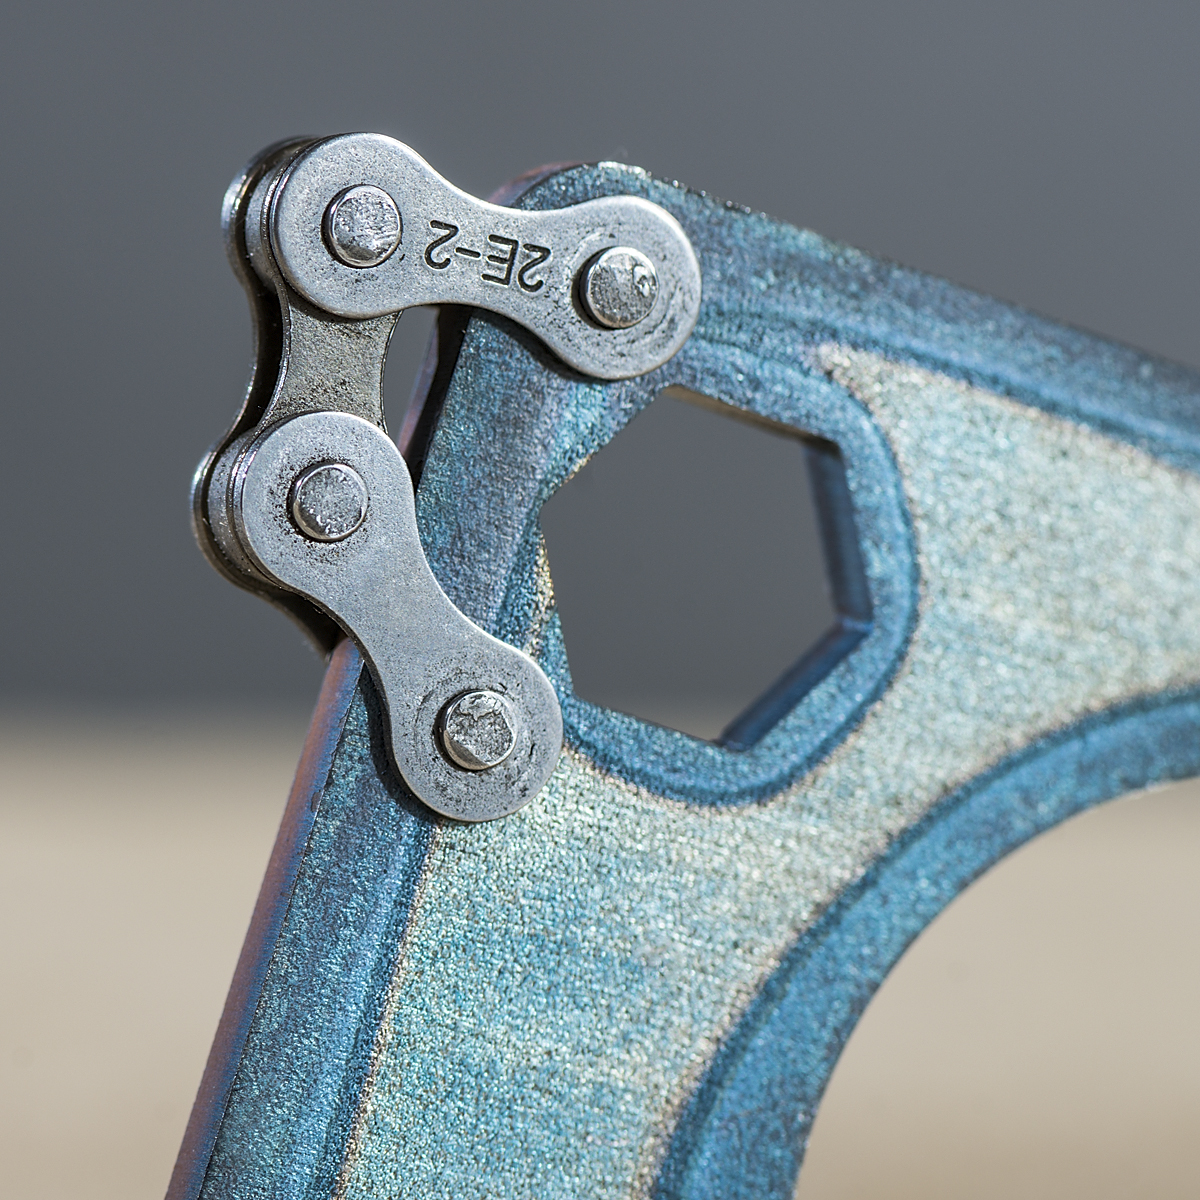 Multitool for fixed gear Detail 1.